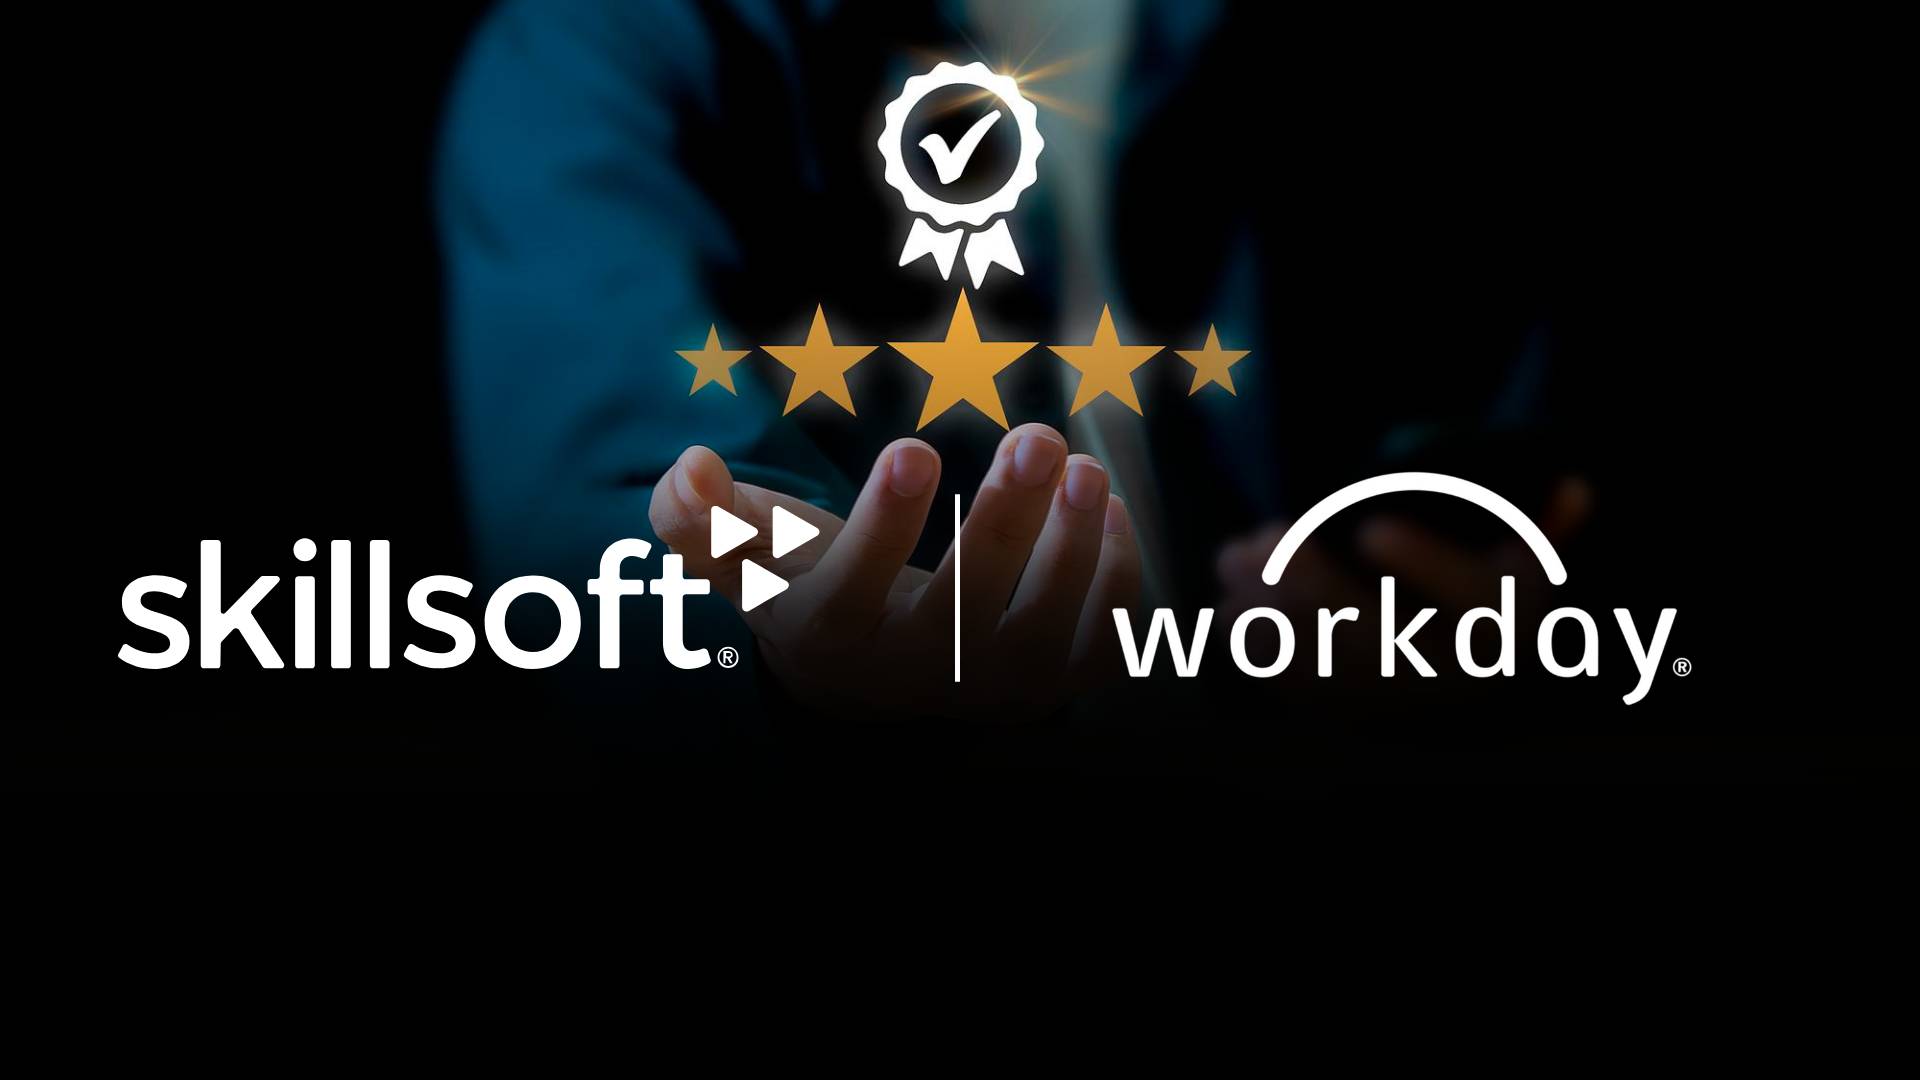 Skillsoft Achieves Workday Integration: Transforming Learning and Talent Development